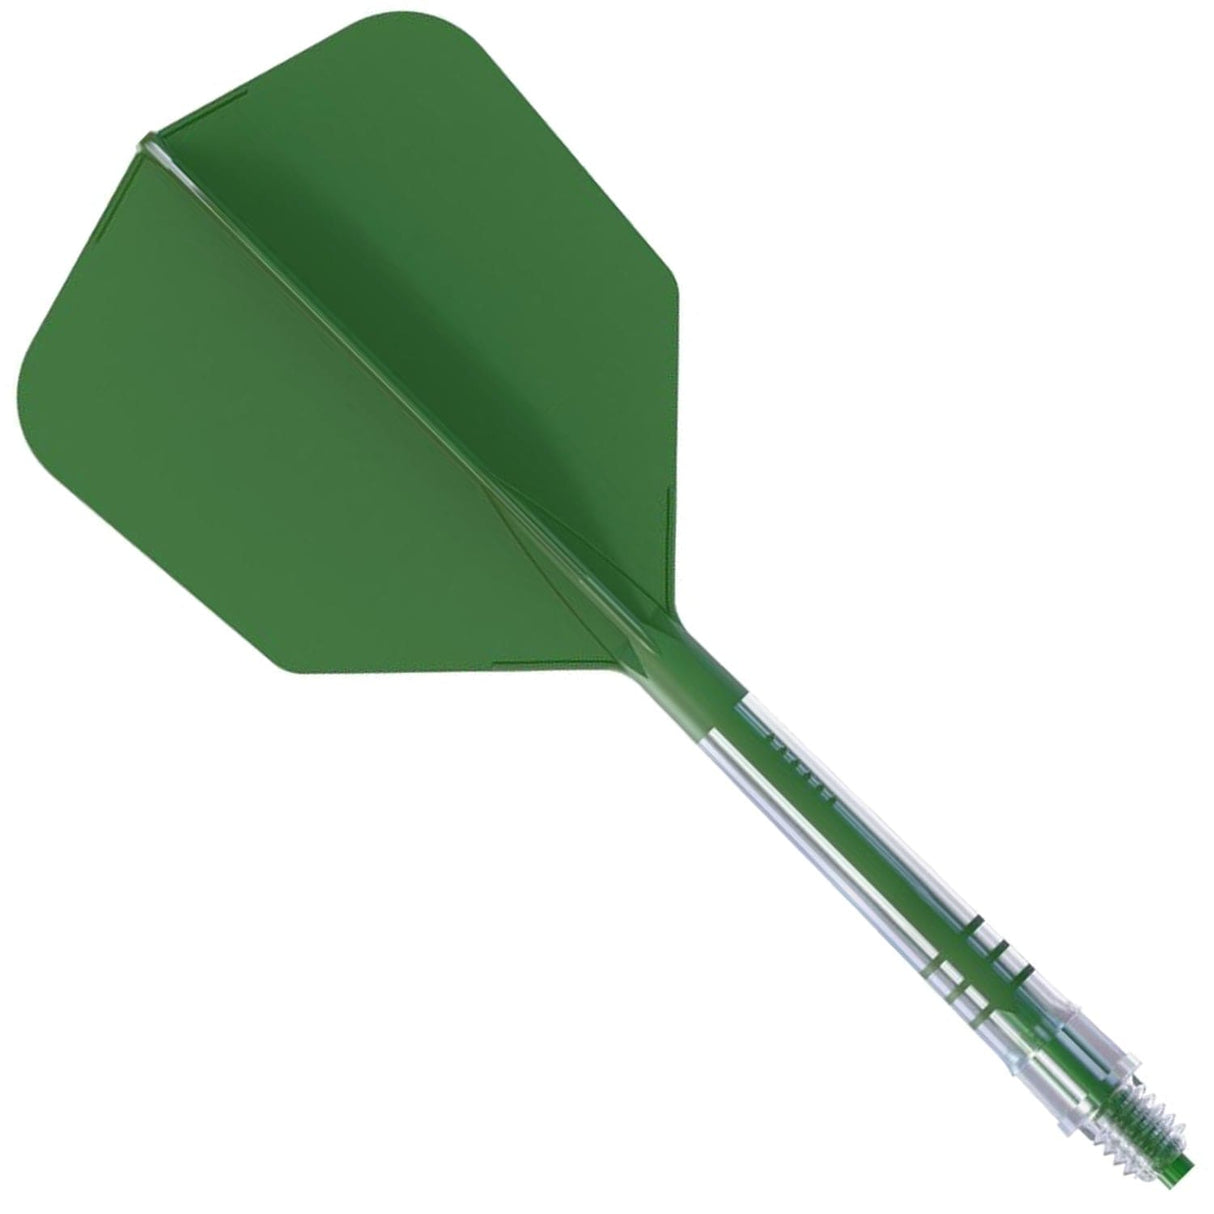 Cuesoul Rost T19 Carbon Fibre - Integrated Dart Shaft and Flights - Big Wing - Green Size 6